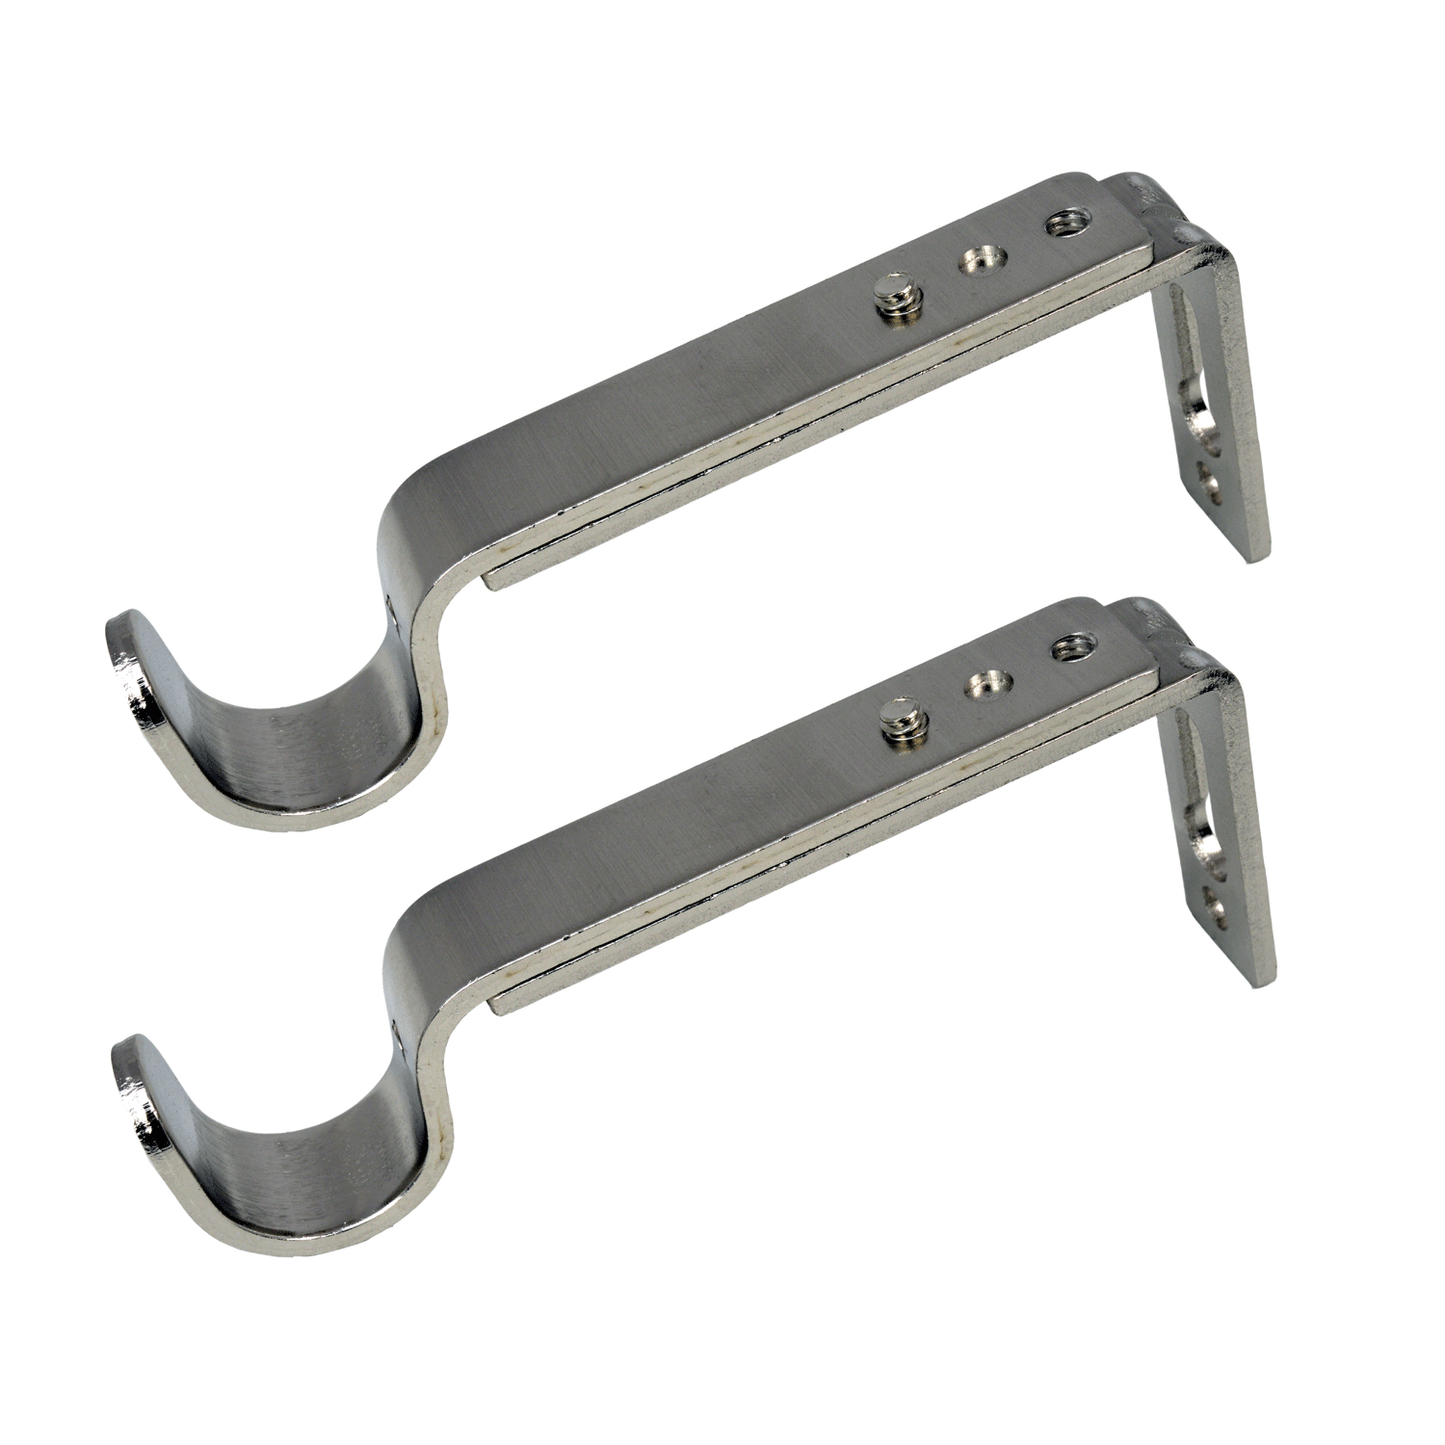 Single Wall pair of Brackets for 16/19mm Rod